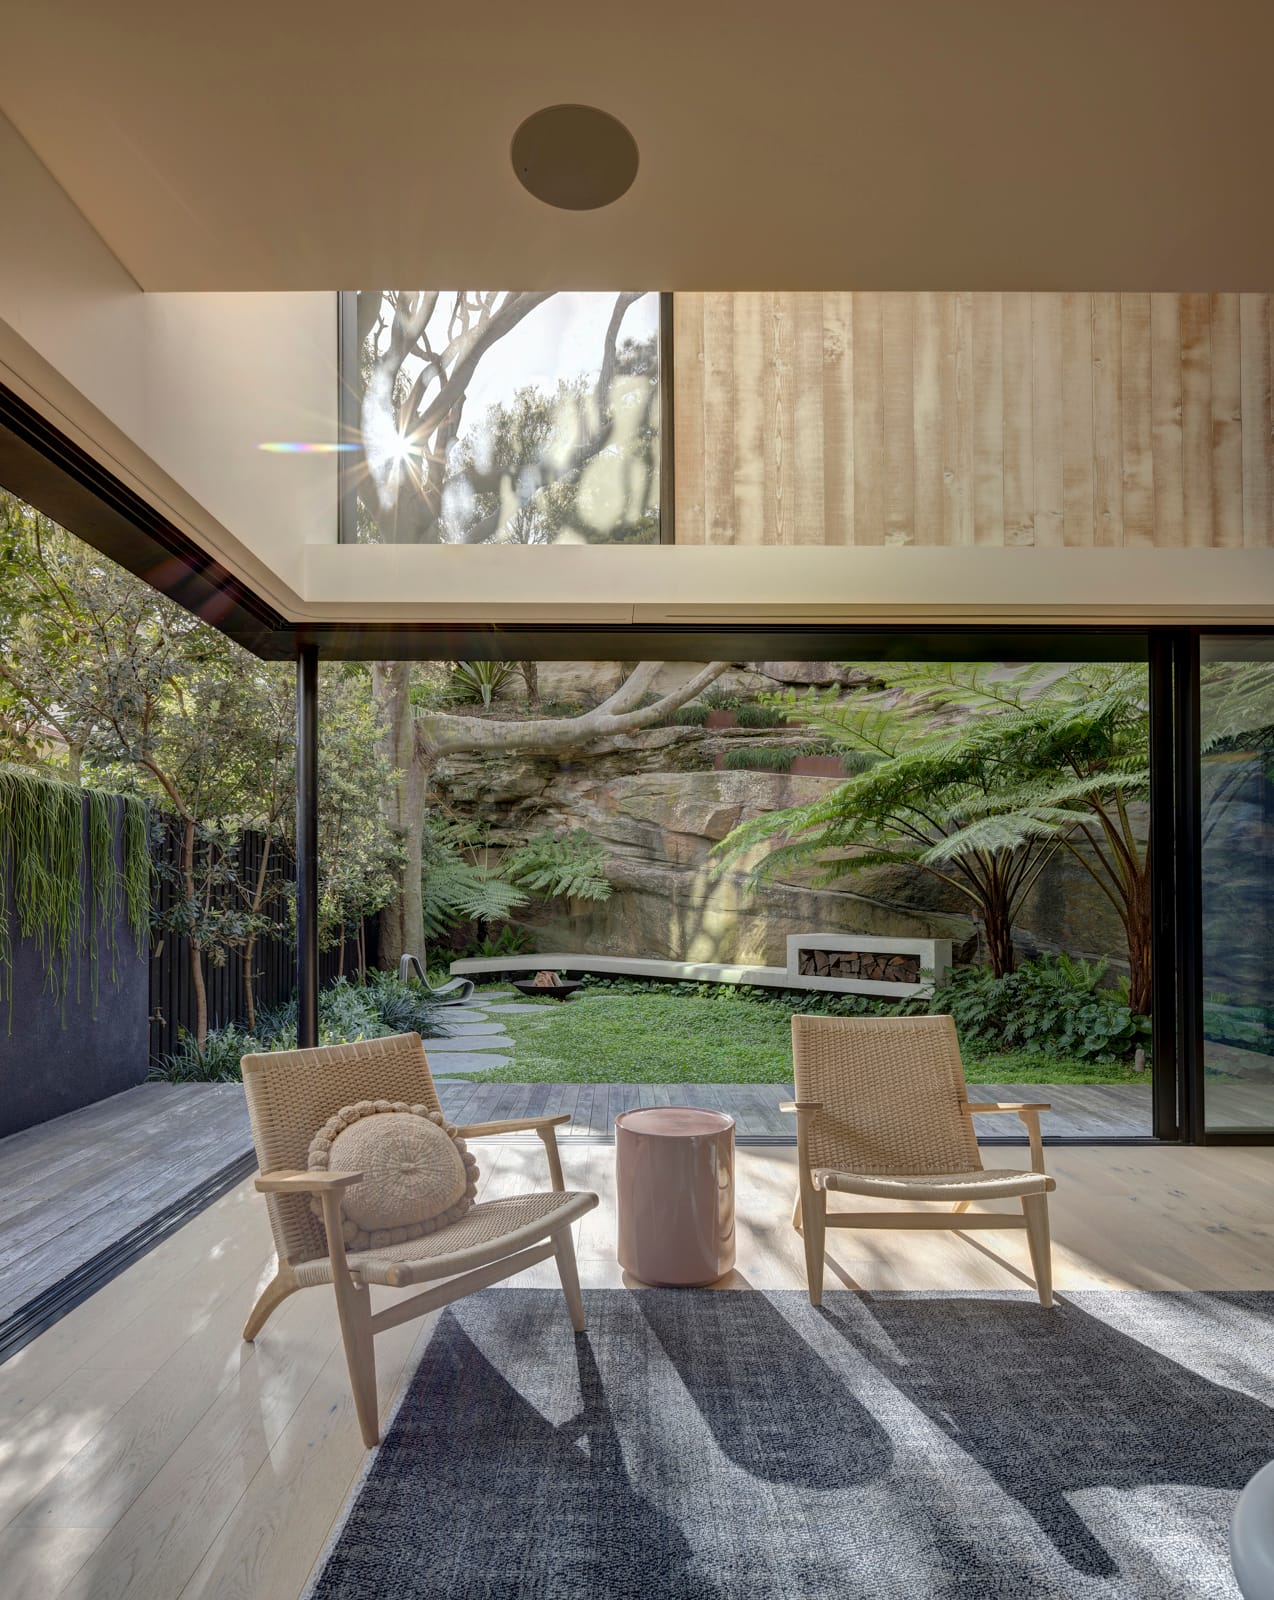 Quarry Box by MCK Architects. Photography by Brett Boardman. Living room with two cane chairs on grey rug. Floor to ceiling windows overlooking backyard behind chairs.